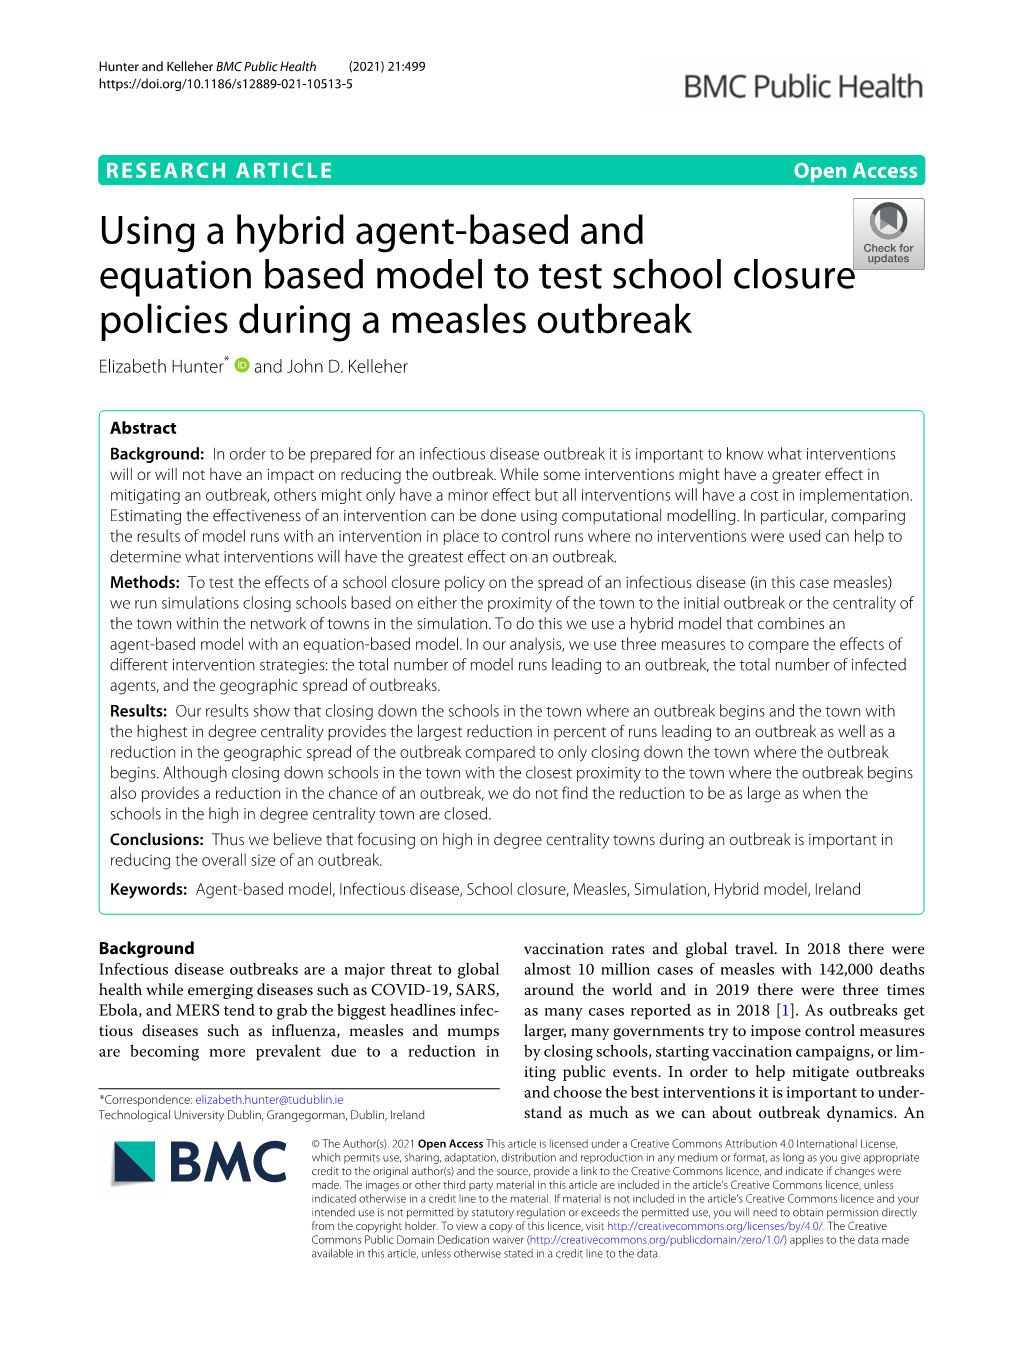 Using a Hybrid Agent-Based and Equation Based Model to Test School Closure Policies During a Measles Outbreak Elizabeth Hunter* and John D